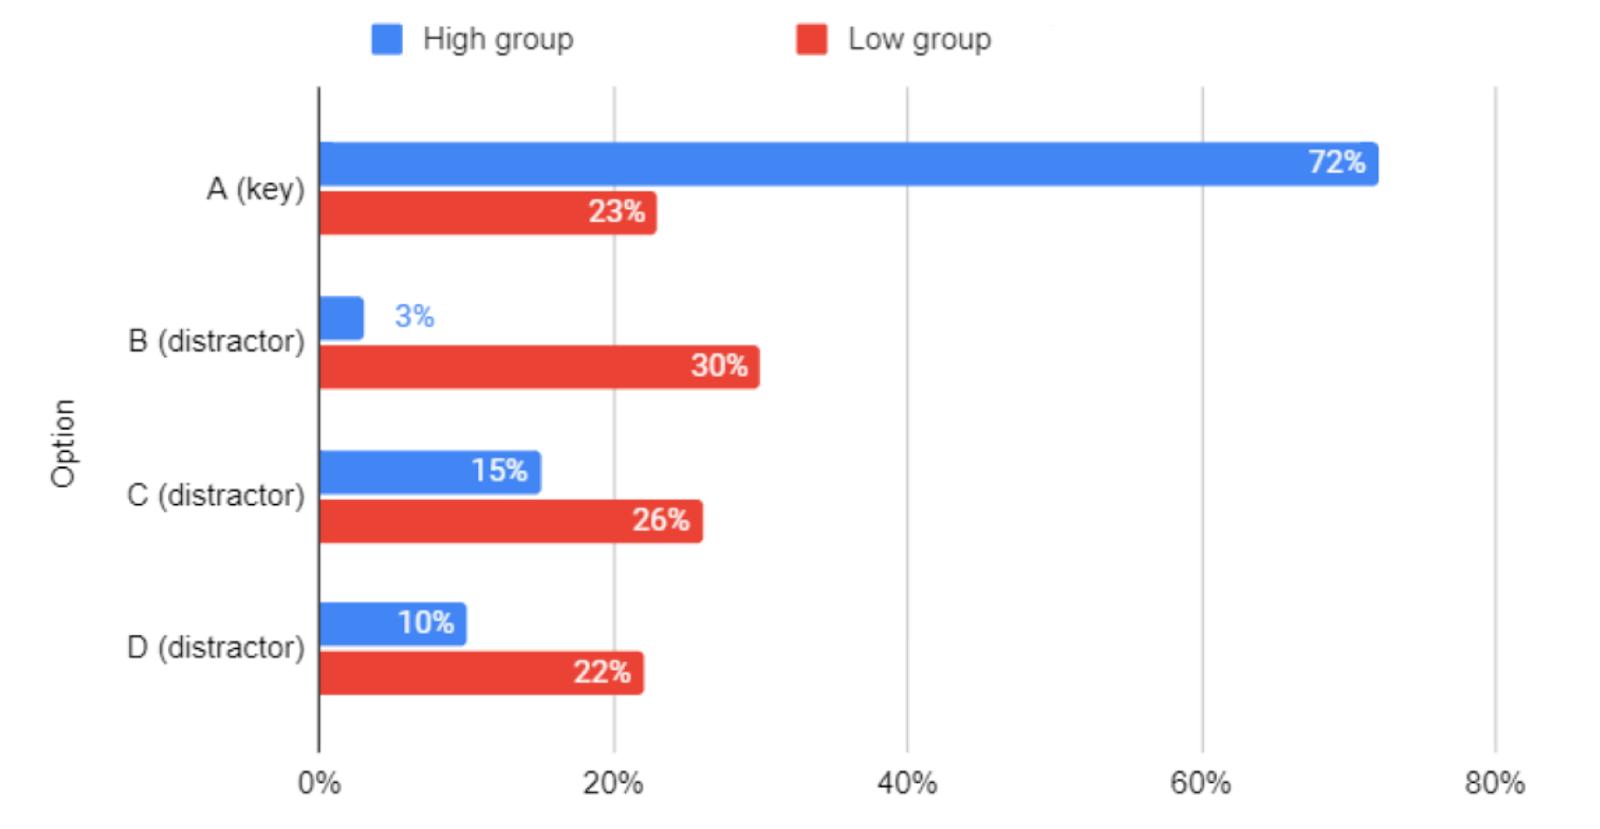 Option endorsement rates in the high-performing group and the low-performing group for the same item